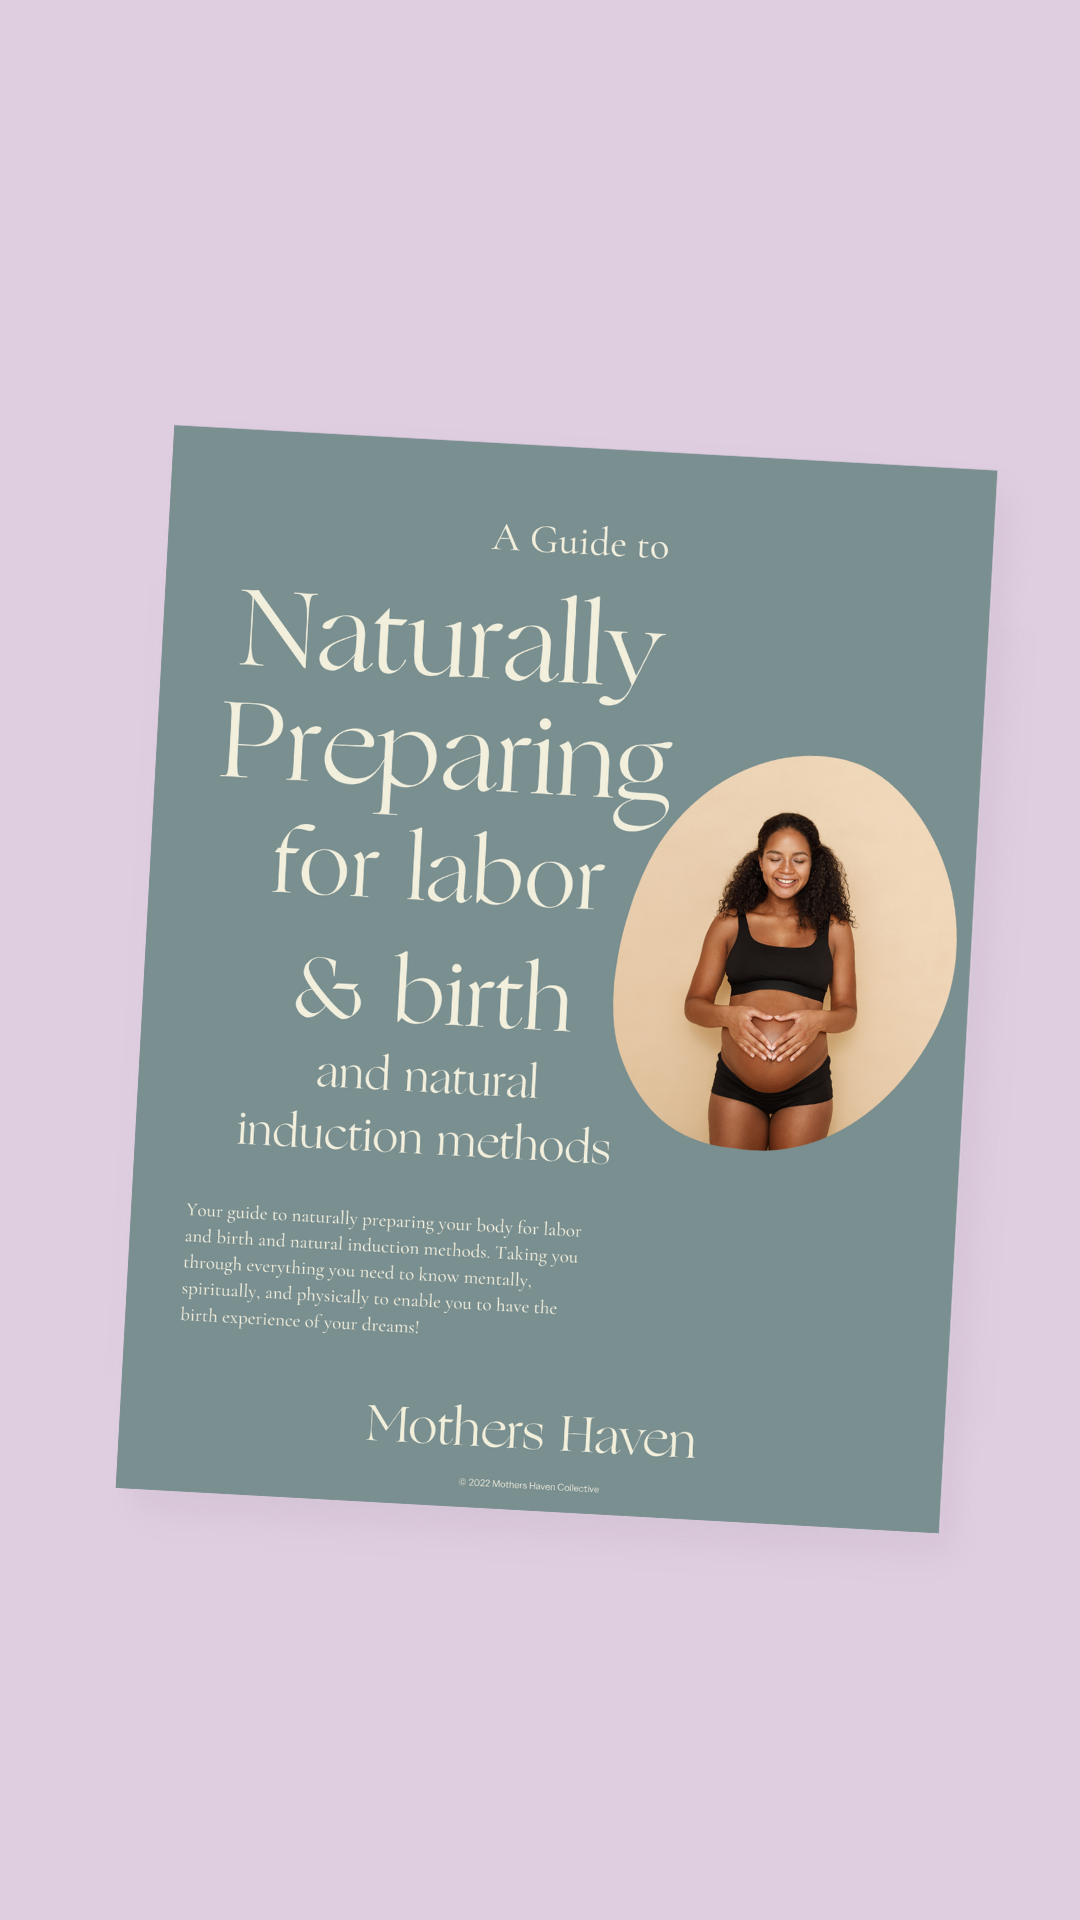 Preparing The Body for Labor and Birth and Natural Induction Methods E-Guide